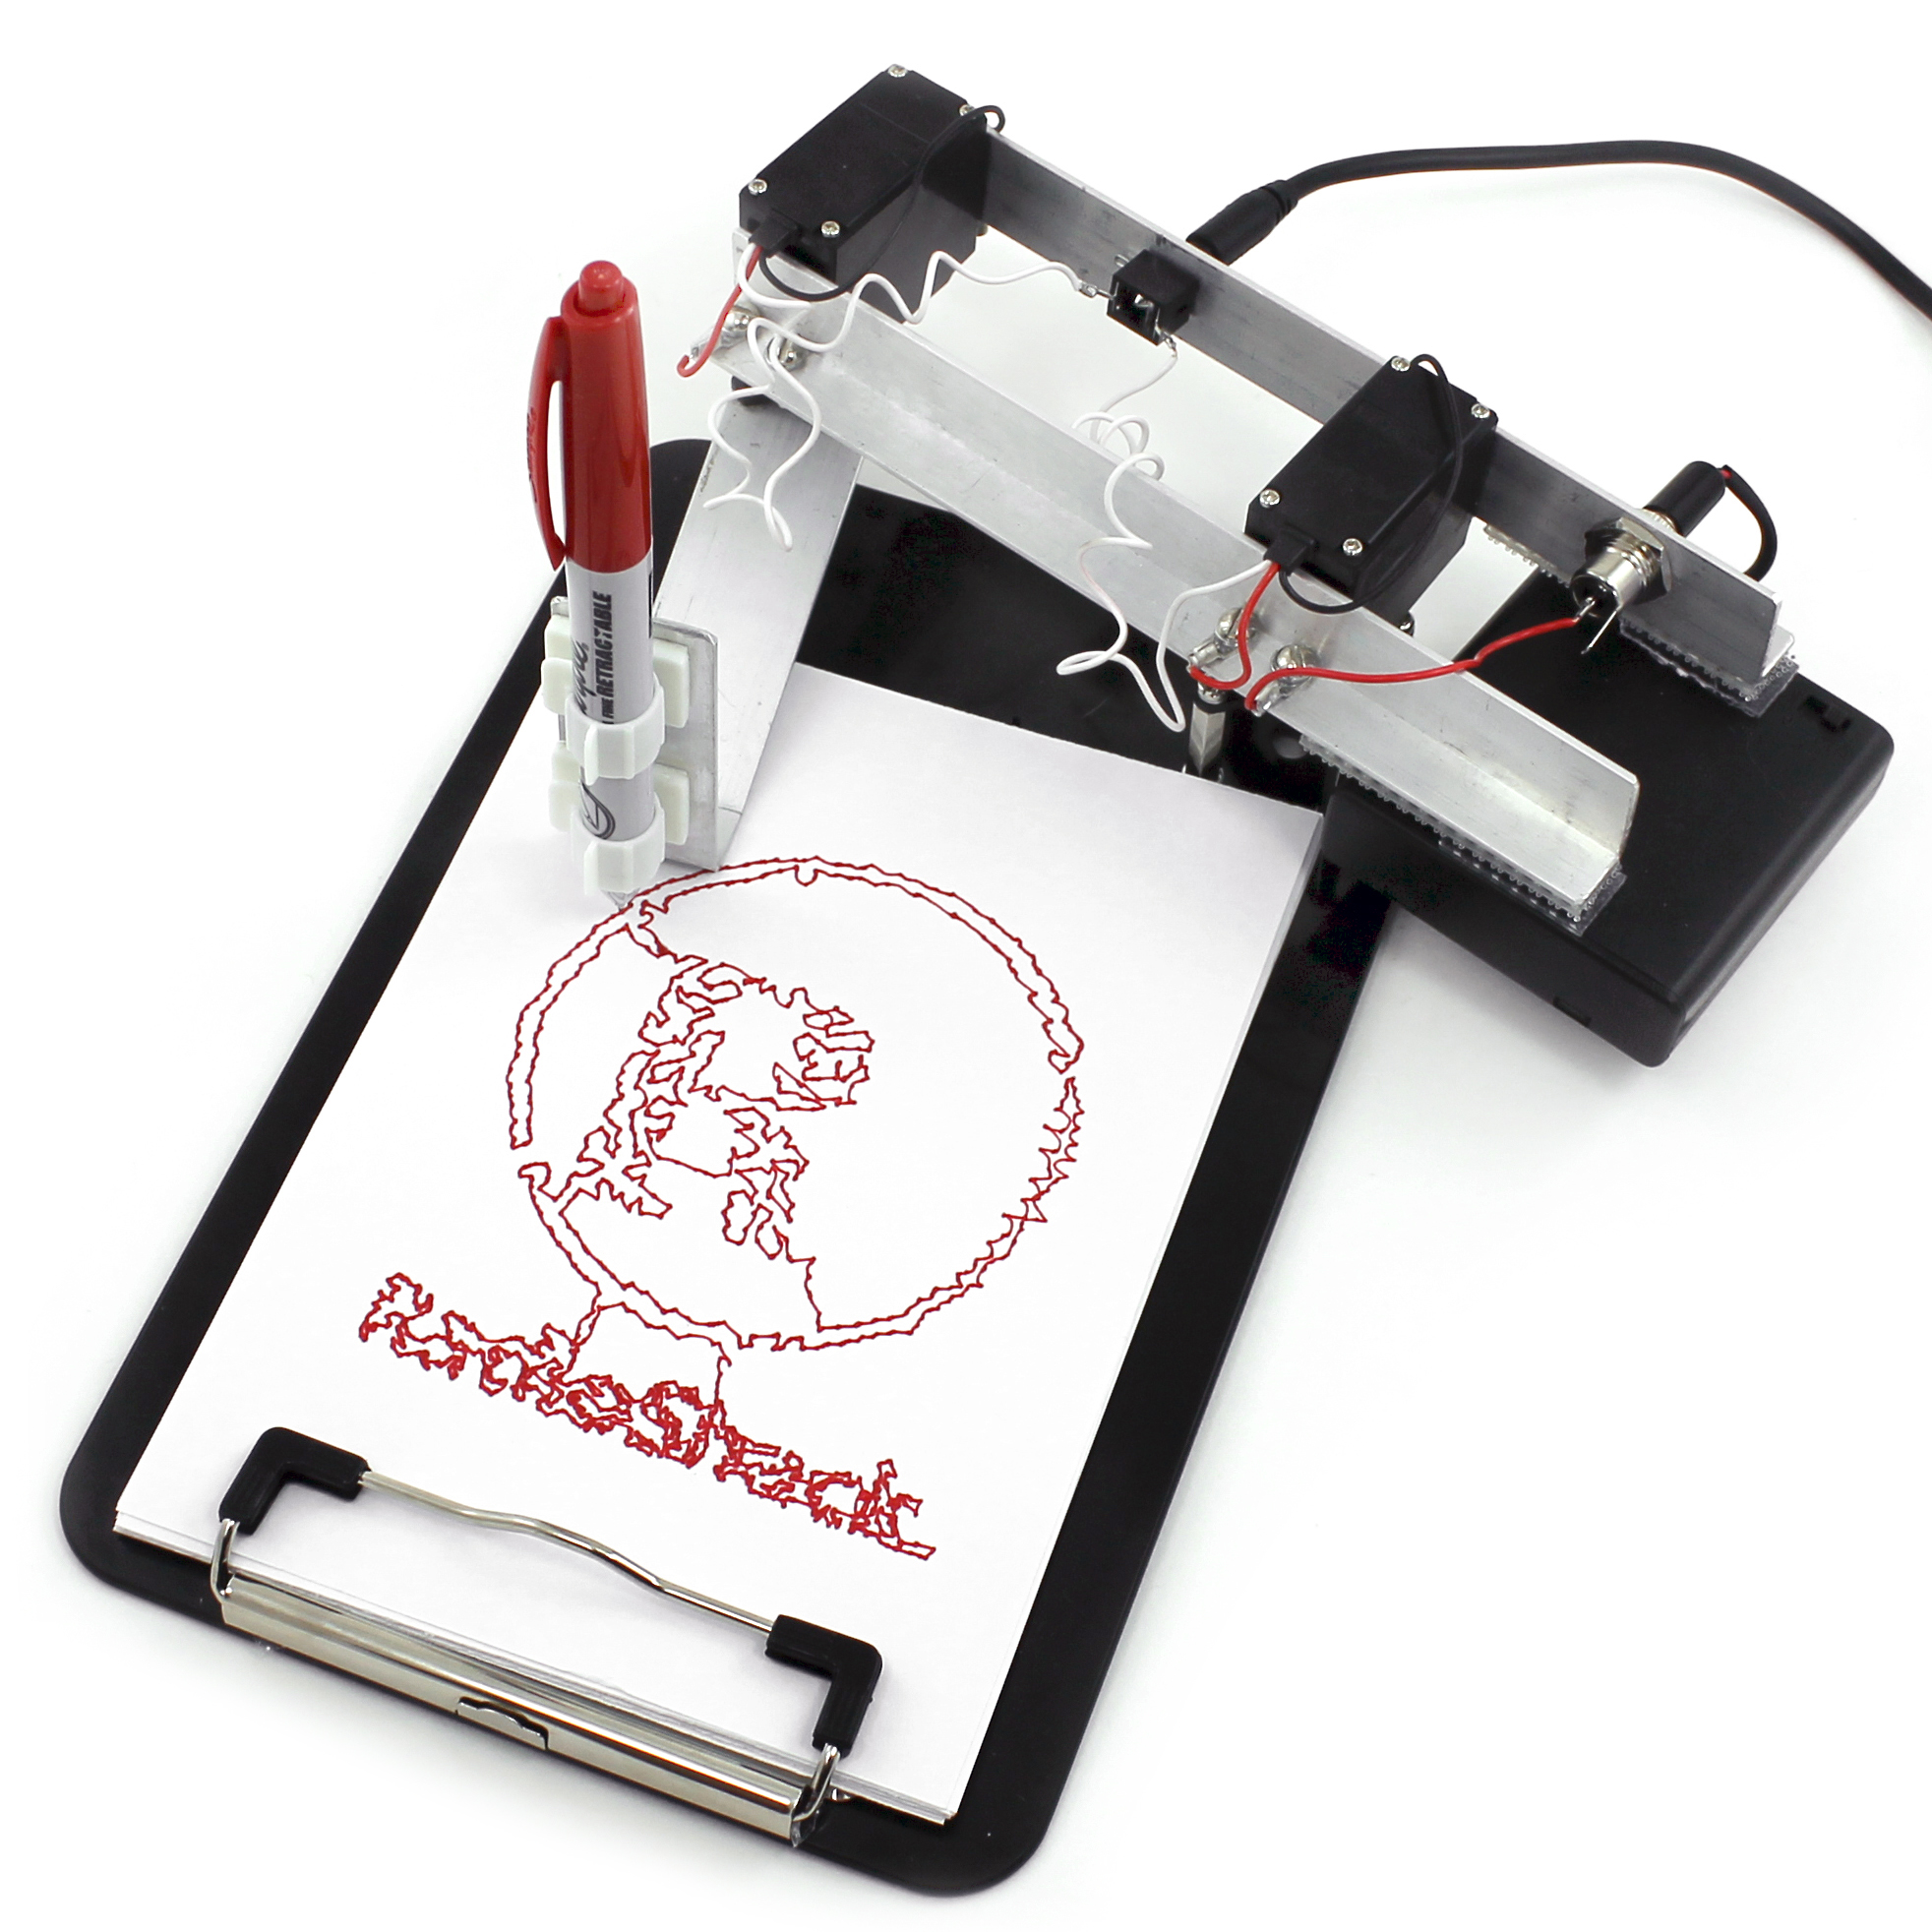 The TRS Drawbot: A Drawing Robot | Make: